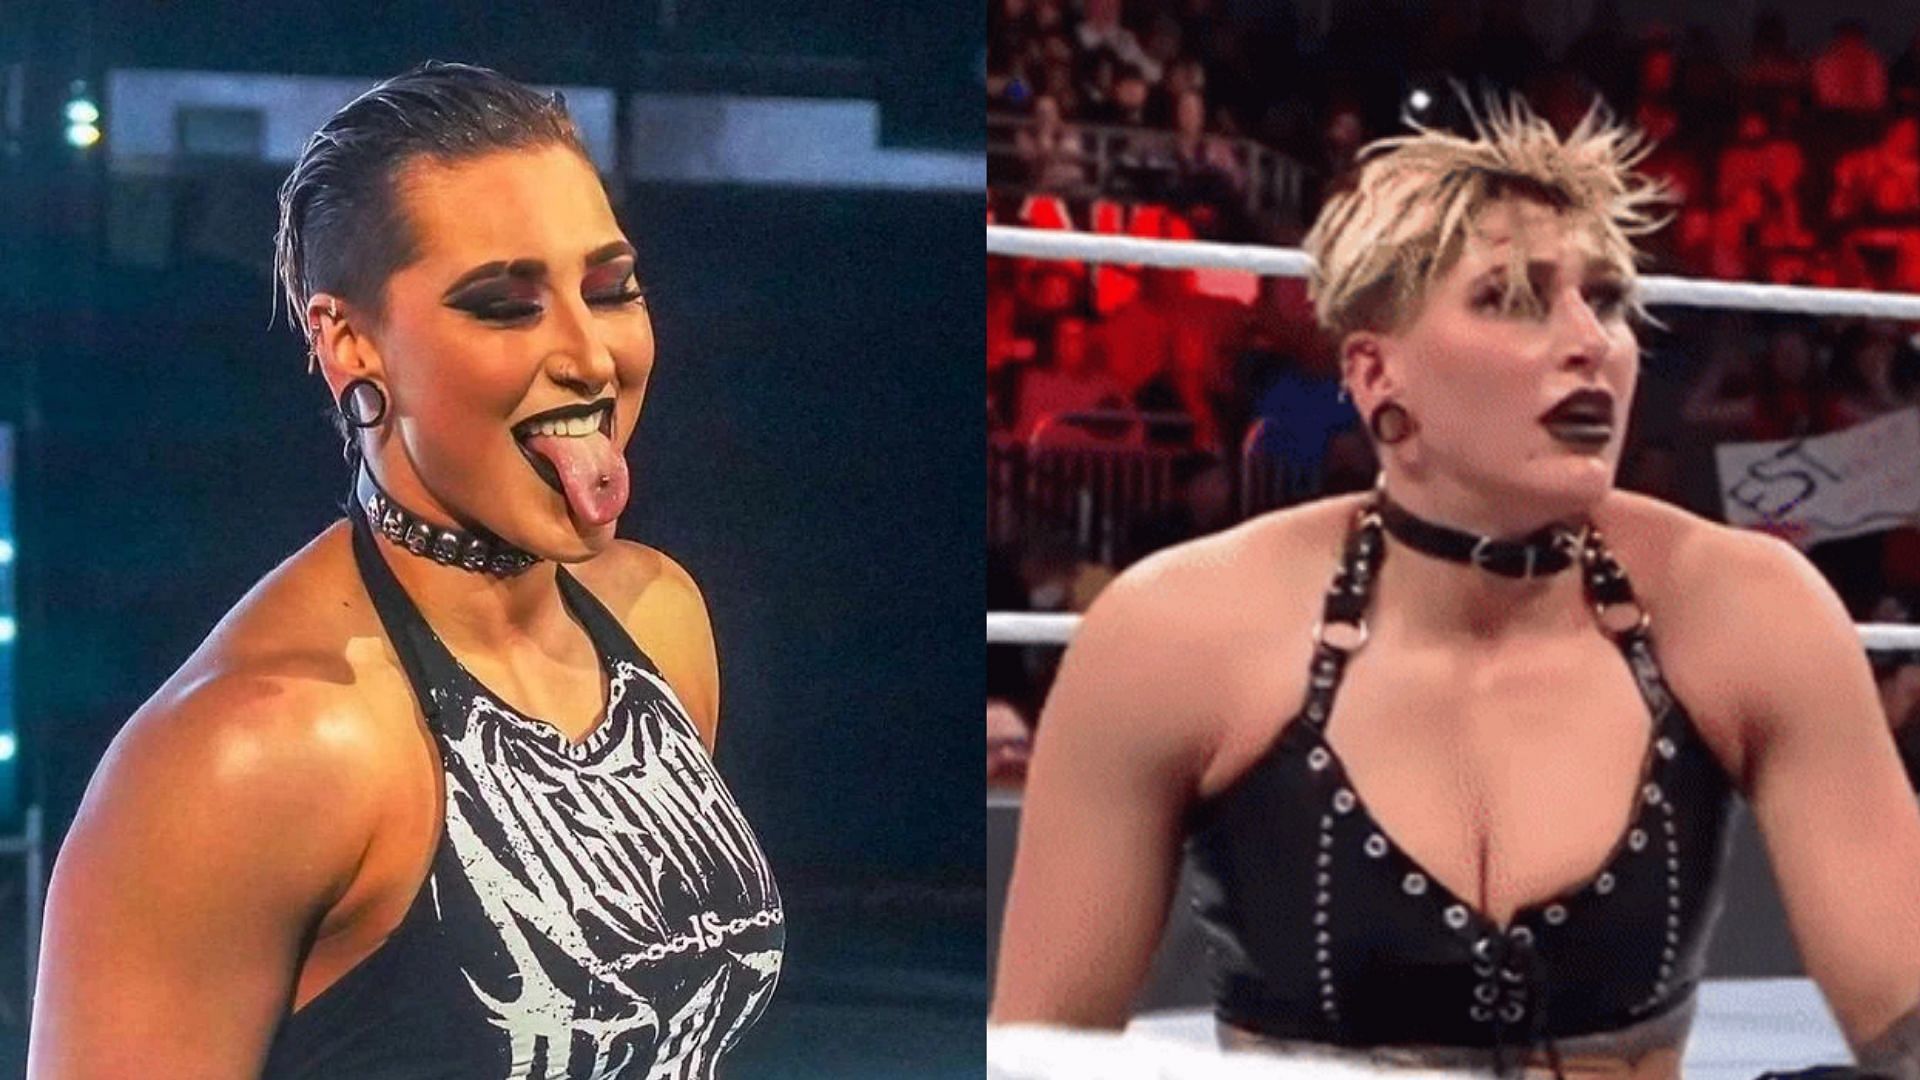 Rhea Ripley might have someone new to work with